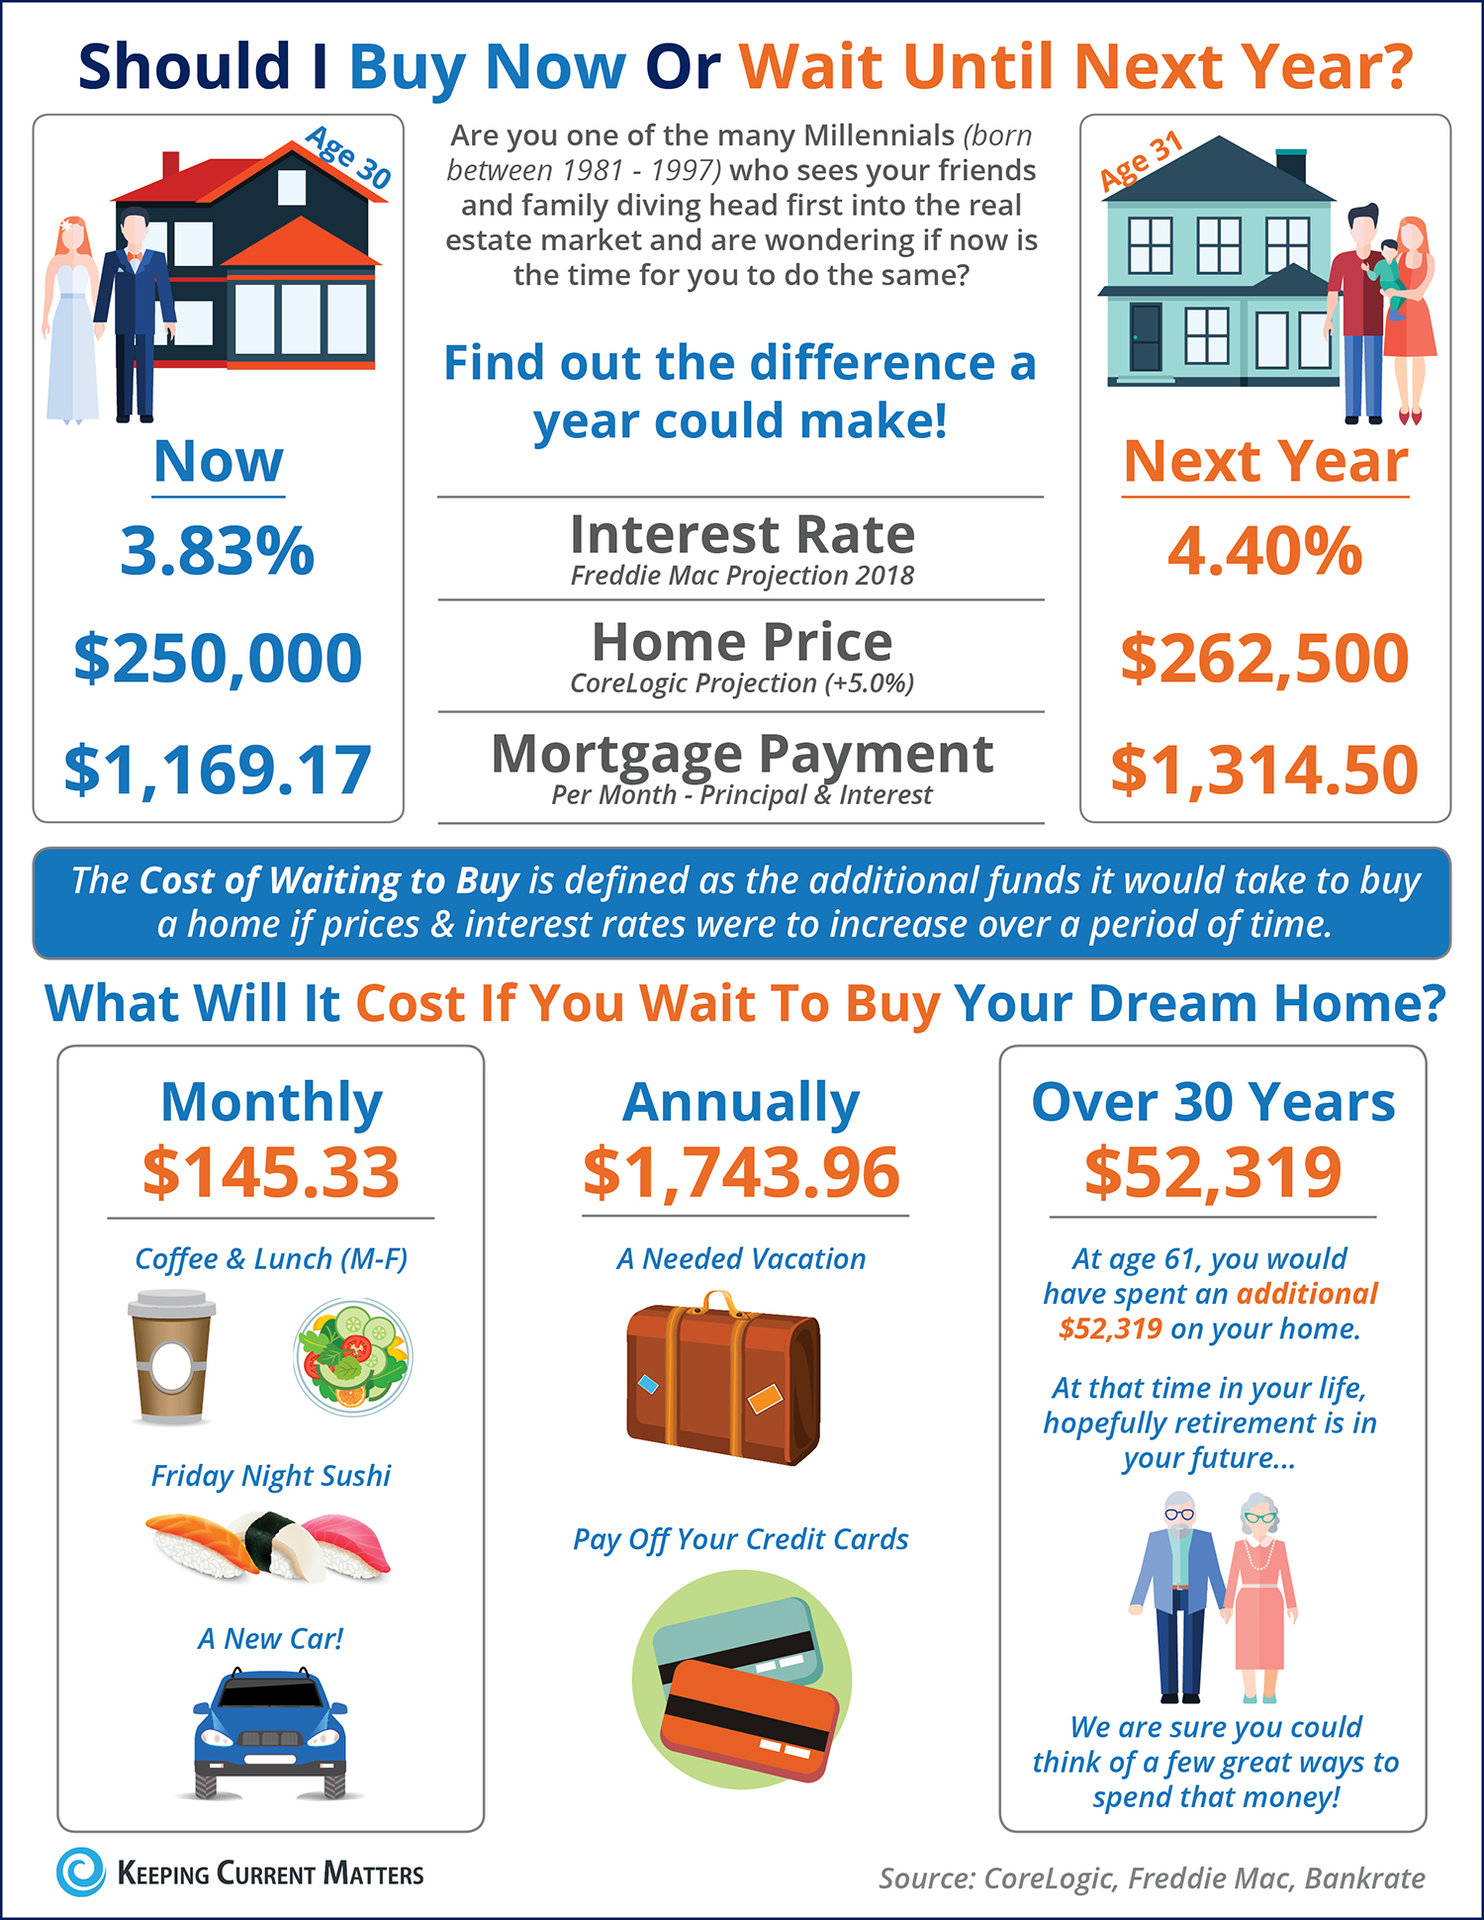 Should I Buy a Home Now? Or Wait Until Next Year? [INFOGRAPHIC]| Keeping Current Matters